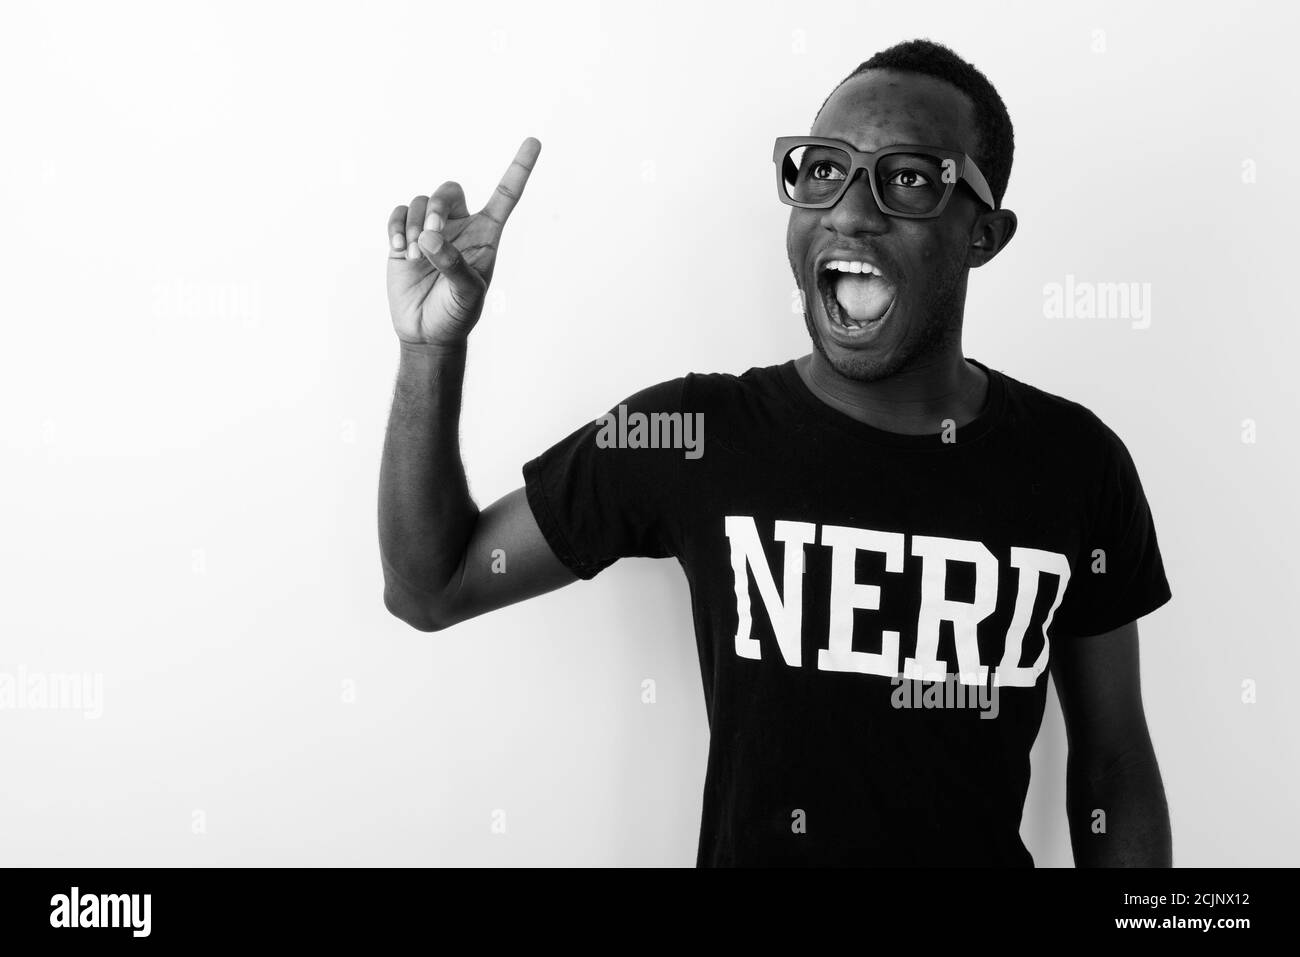 Young happy African geek man with great idea smiling and pointing finger up while wearing Nerd shirt Stock Photo